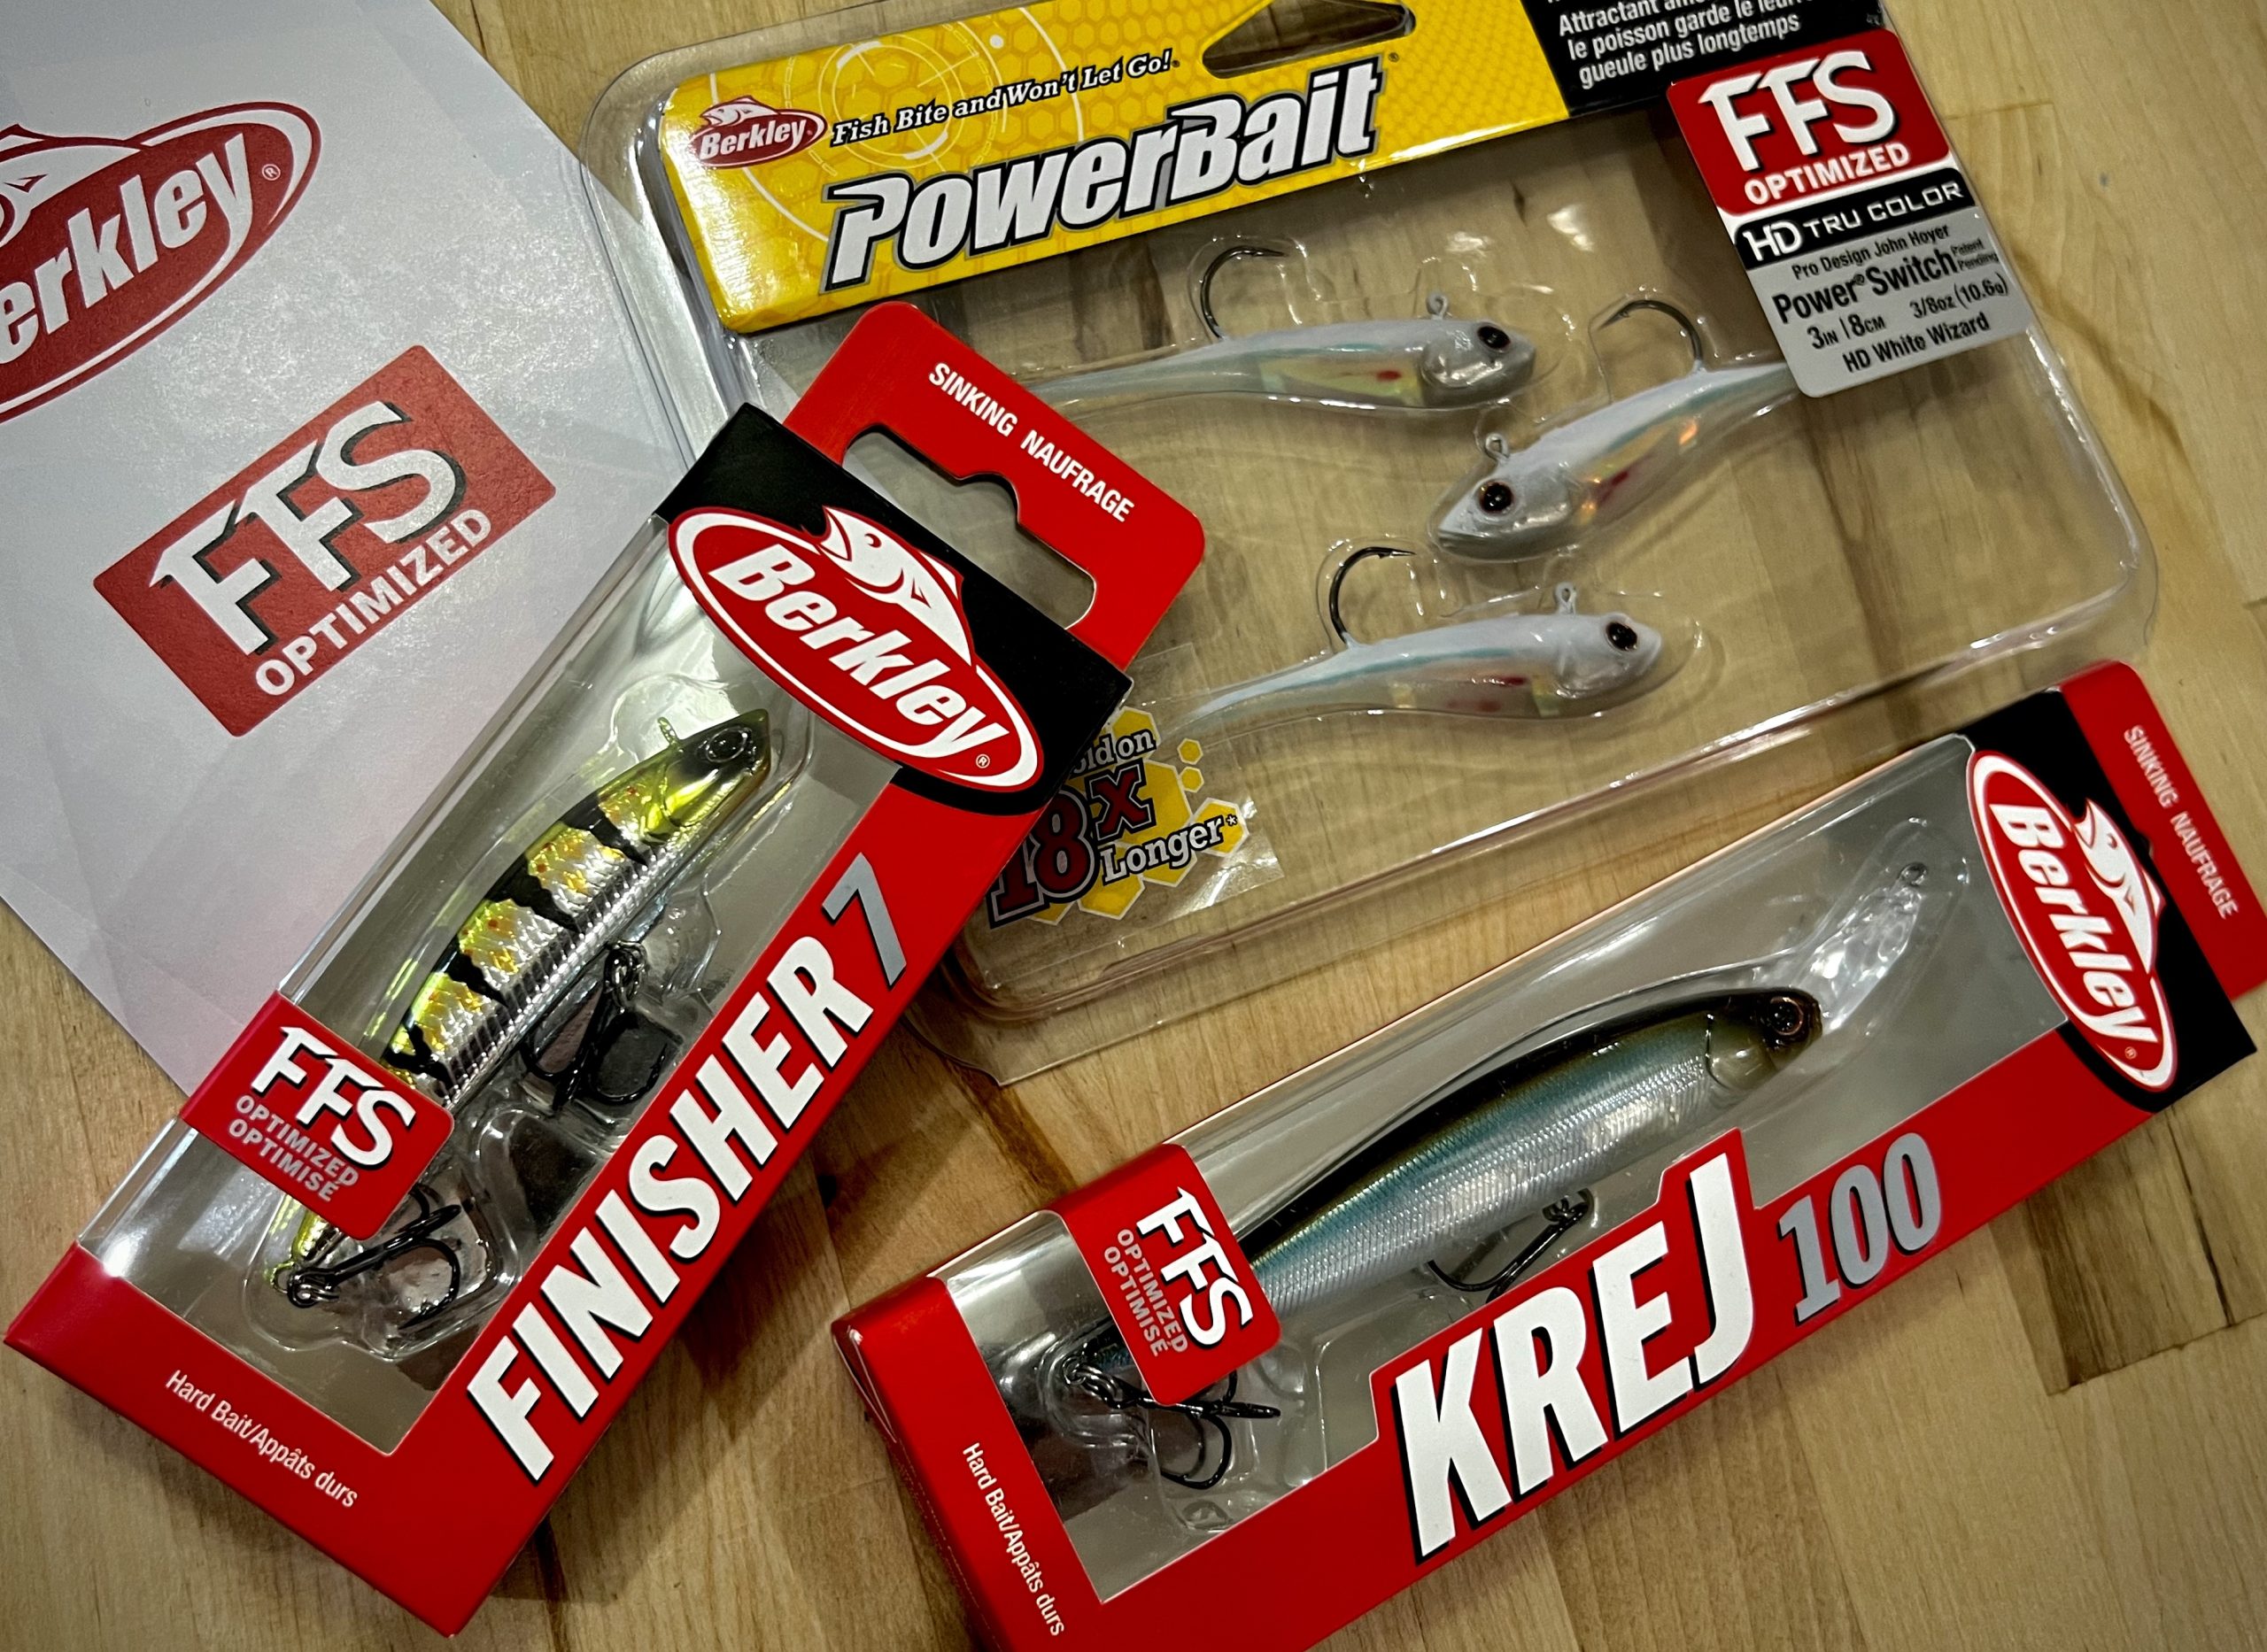 Berkley Finisher, Real Deal Tackle